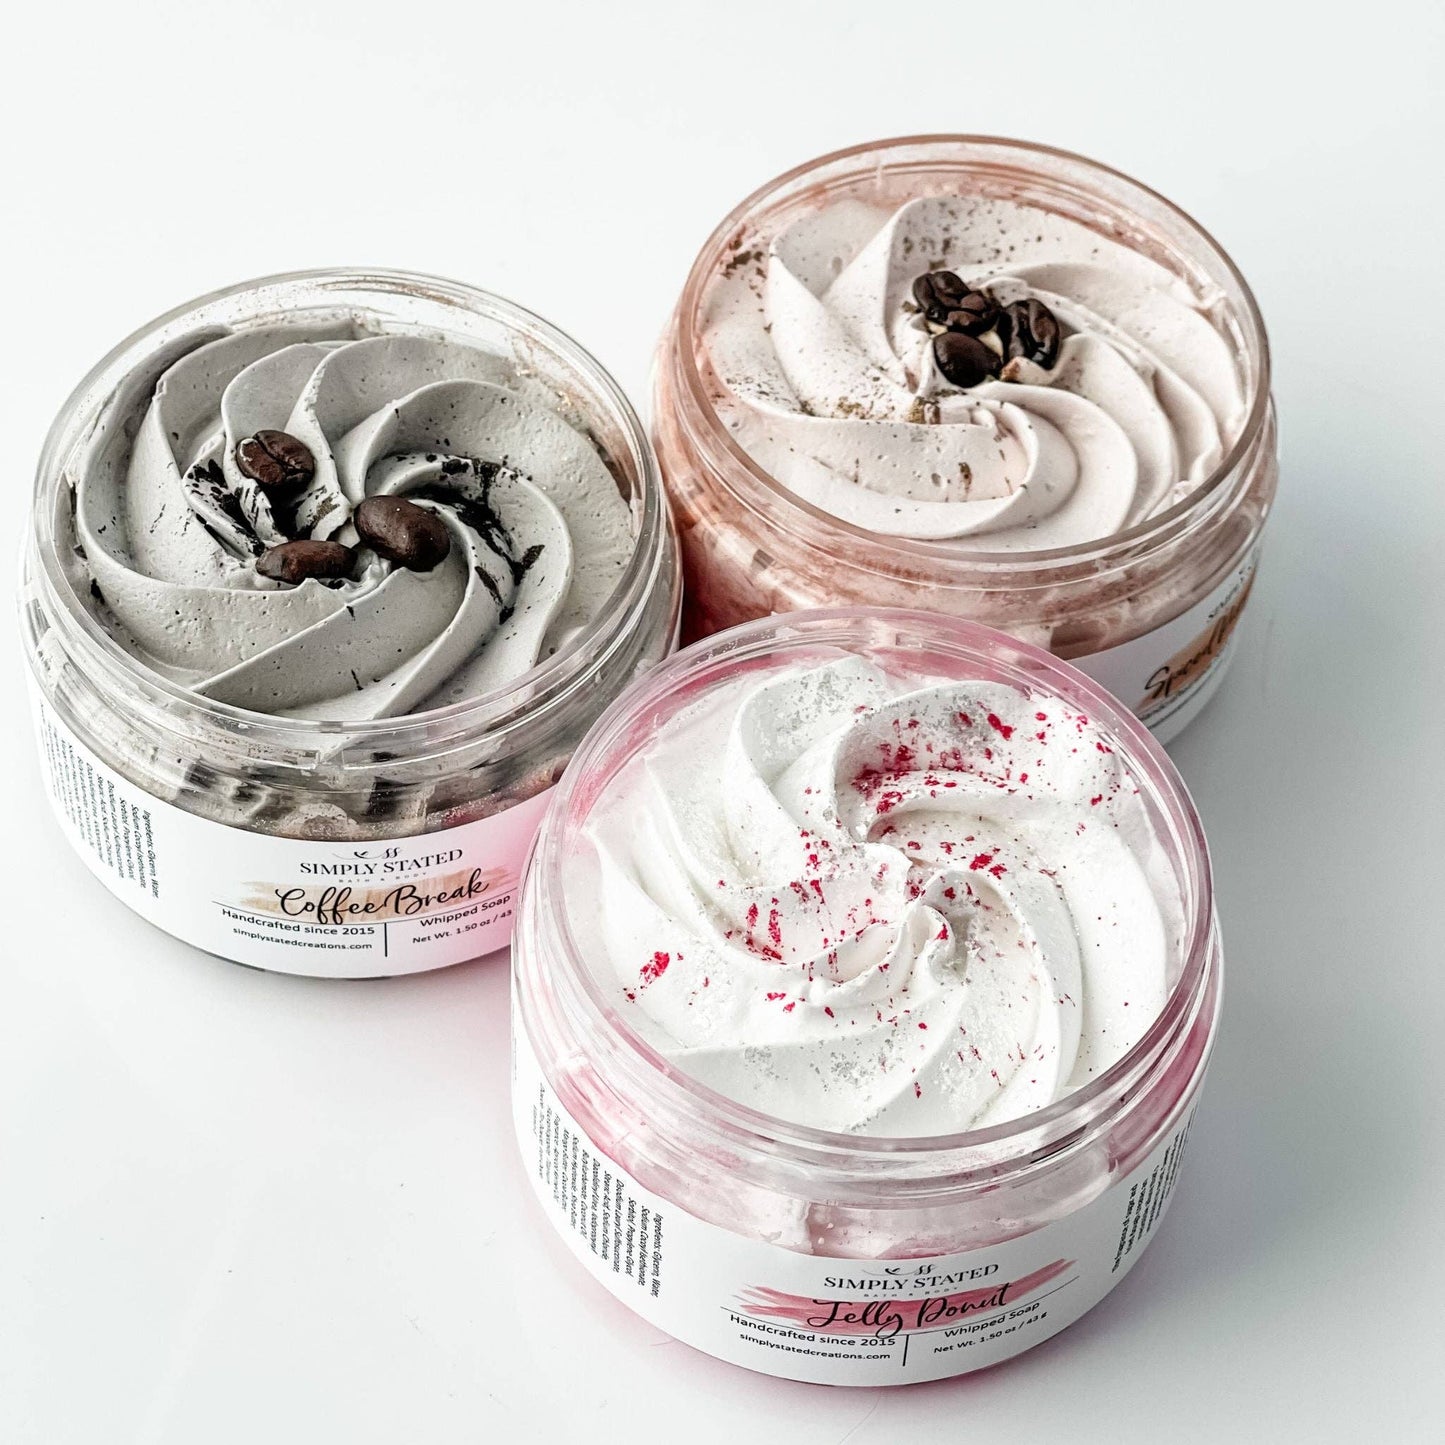 Whipped Soap: Jelly Donut